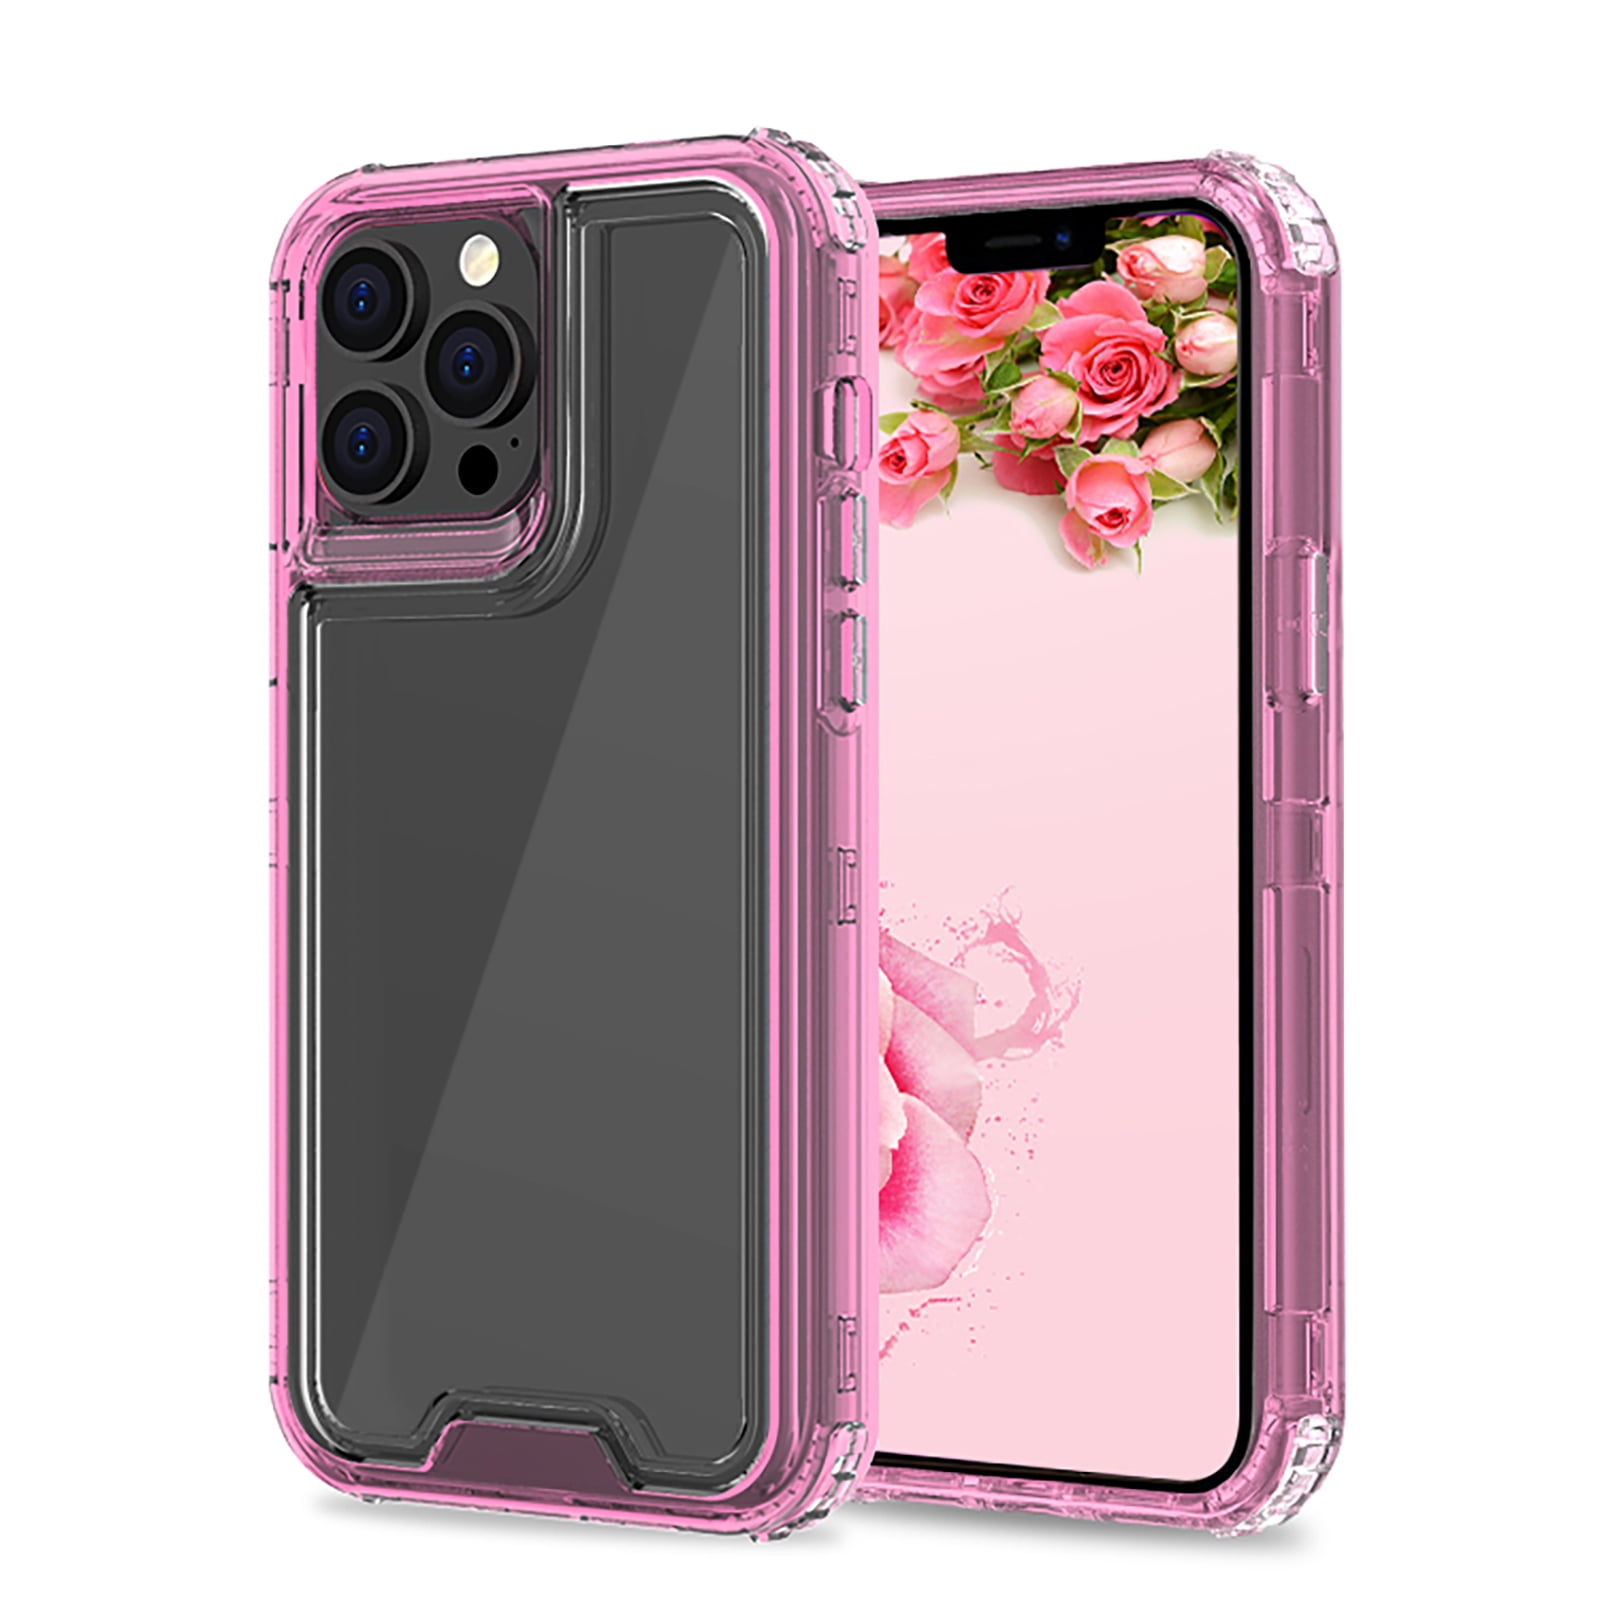 6.7 inch_2021 Release Fireflies RoseParrot Case for iPhone 13 Pro Max, Soft&Flexible Transparent Bumper Shockproof Protective Cover Clear with Pattern Design